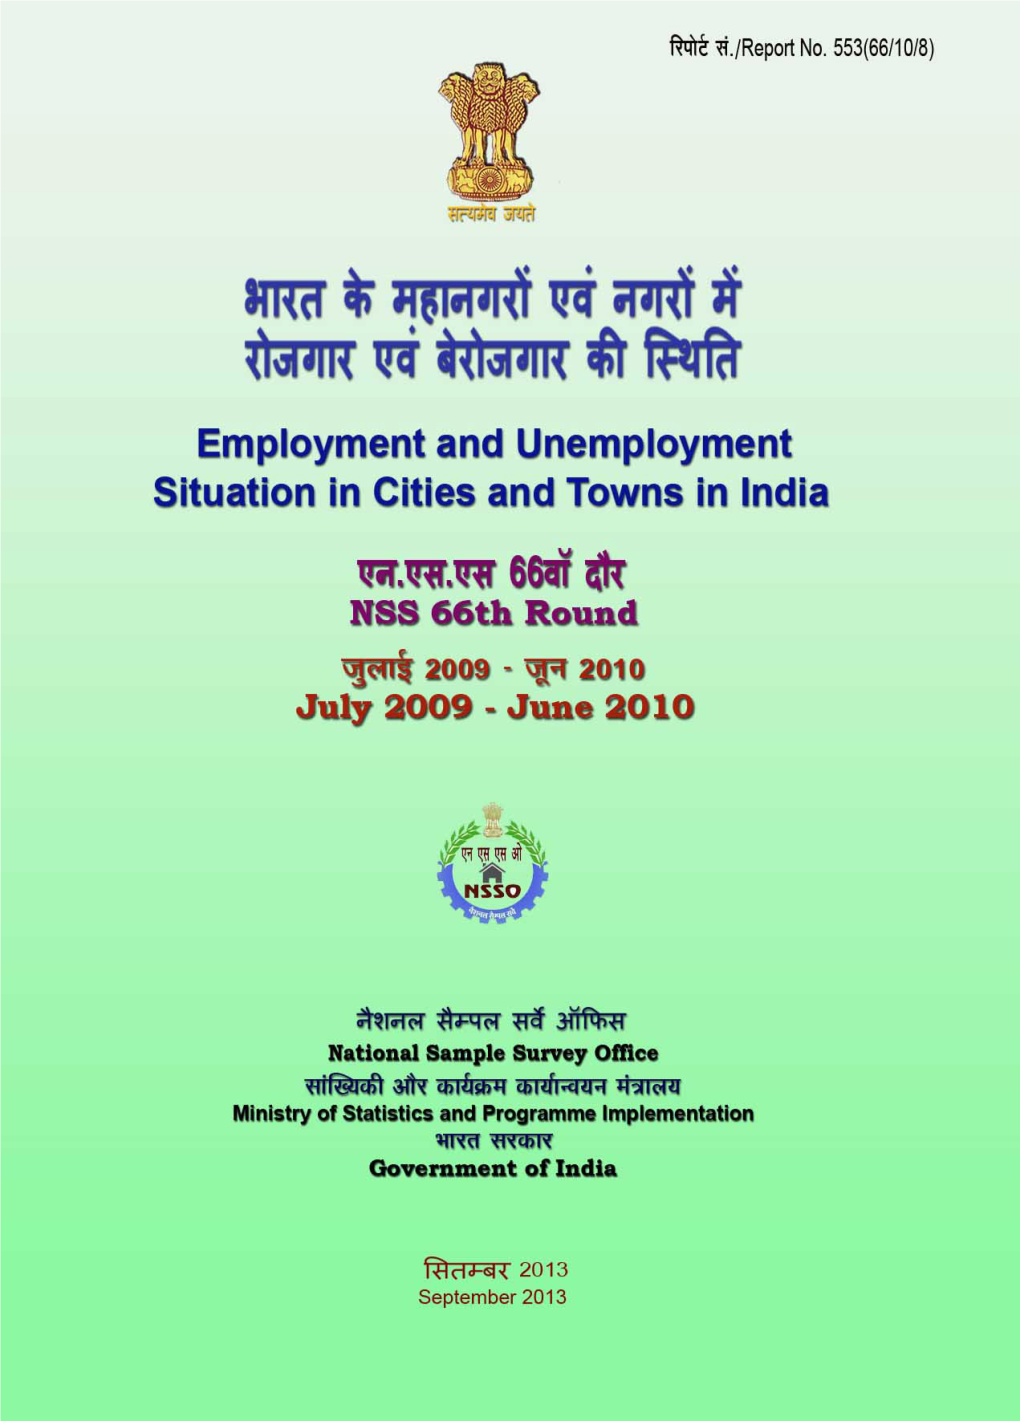 Employment and Unemployment Situation in Cities And